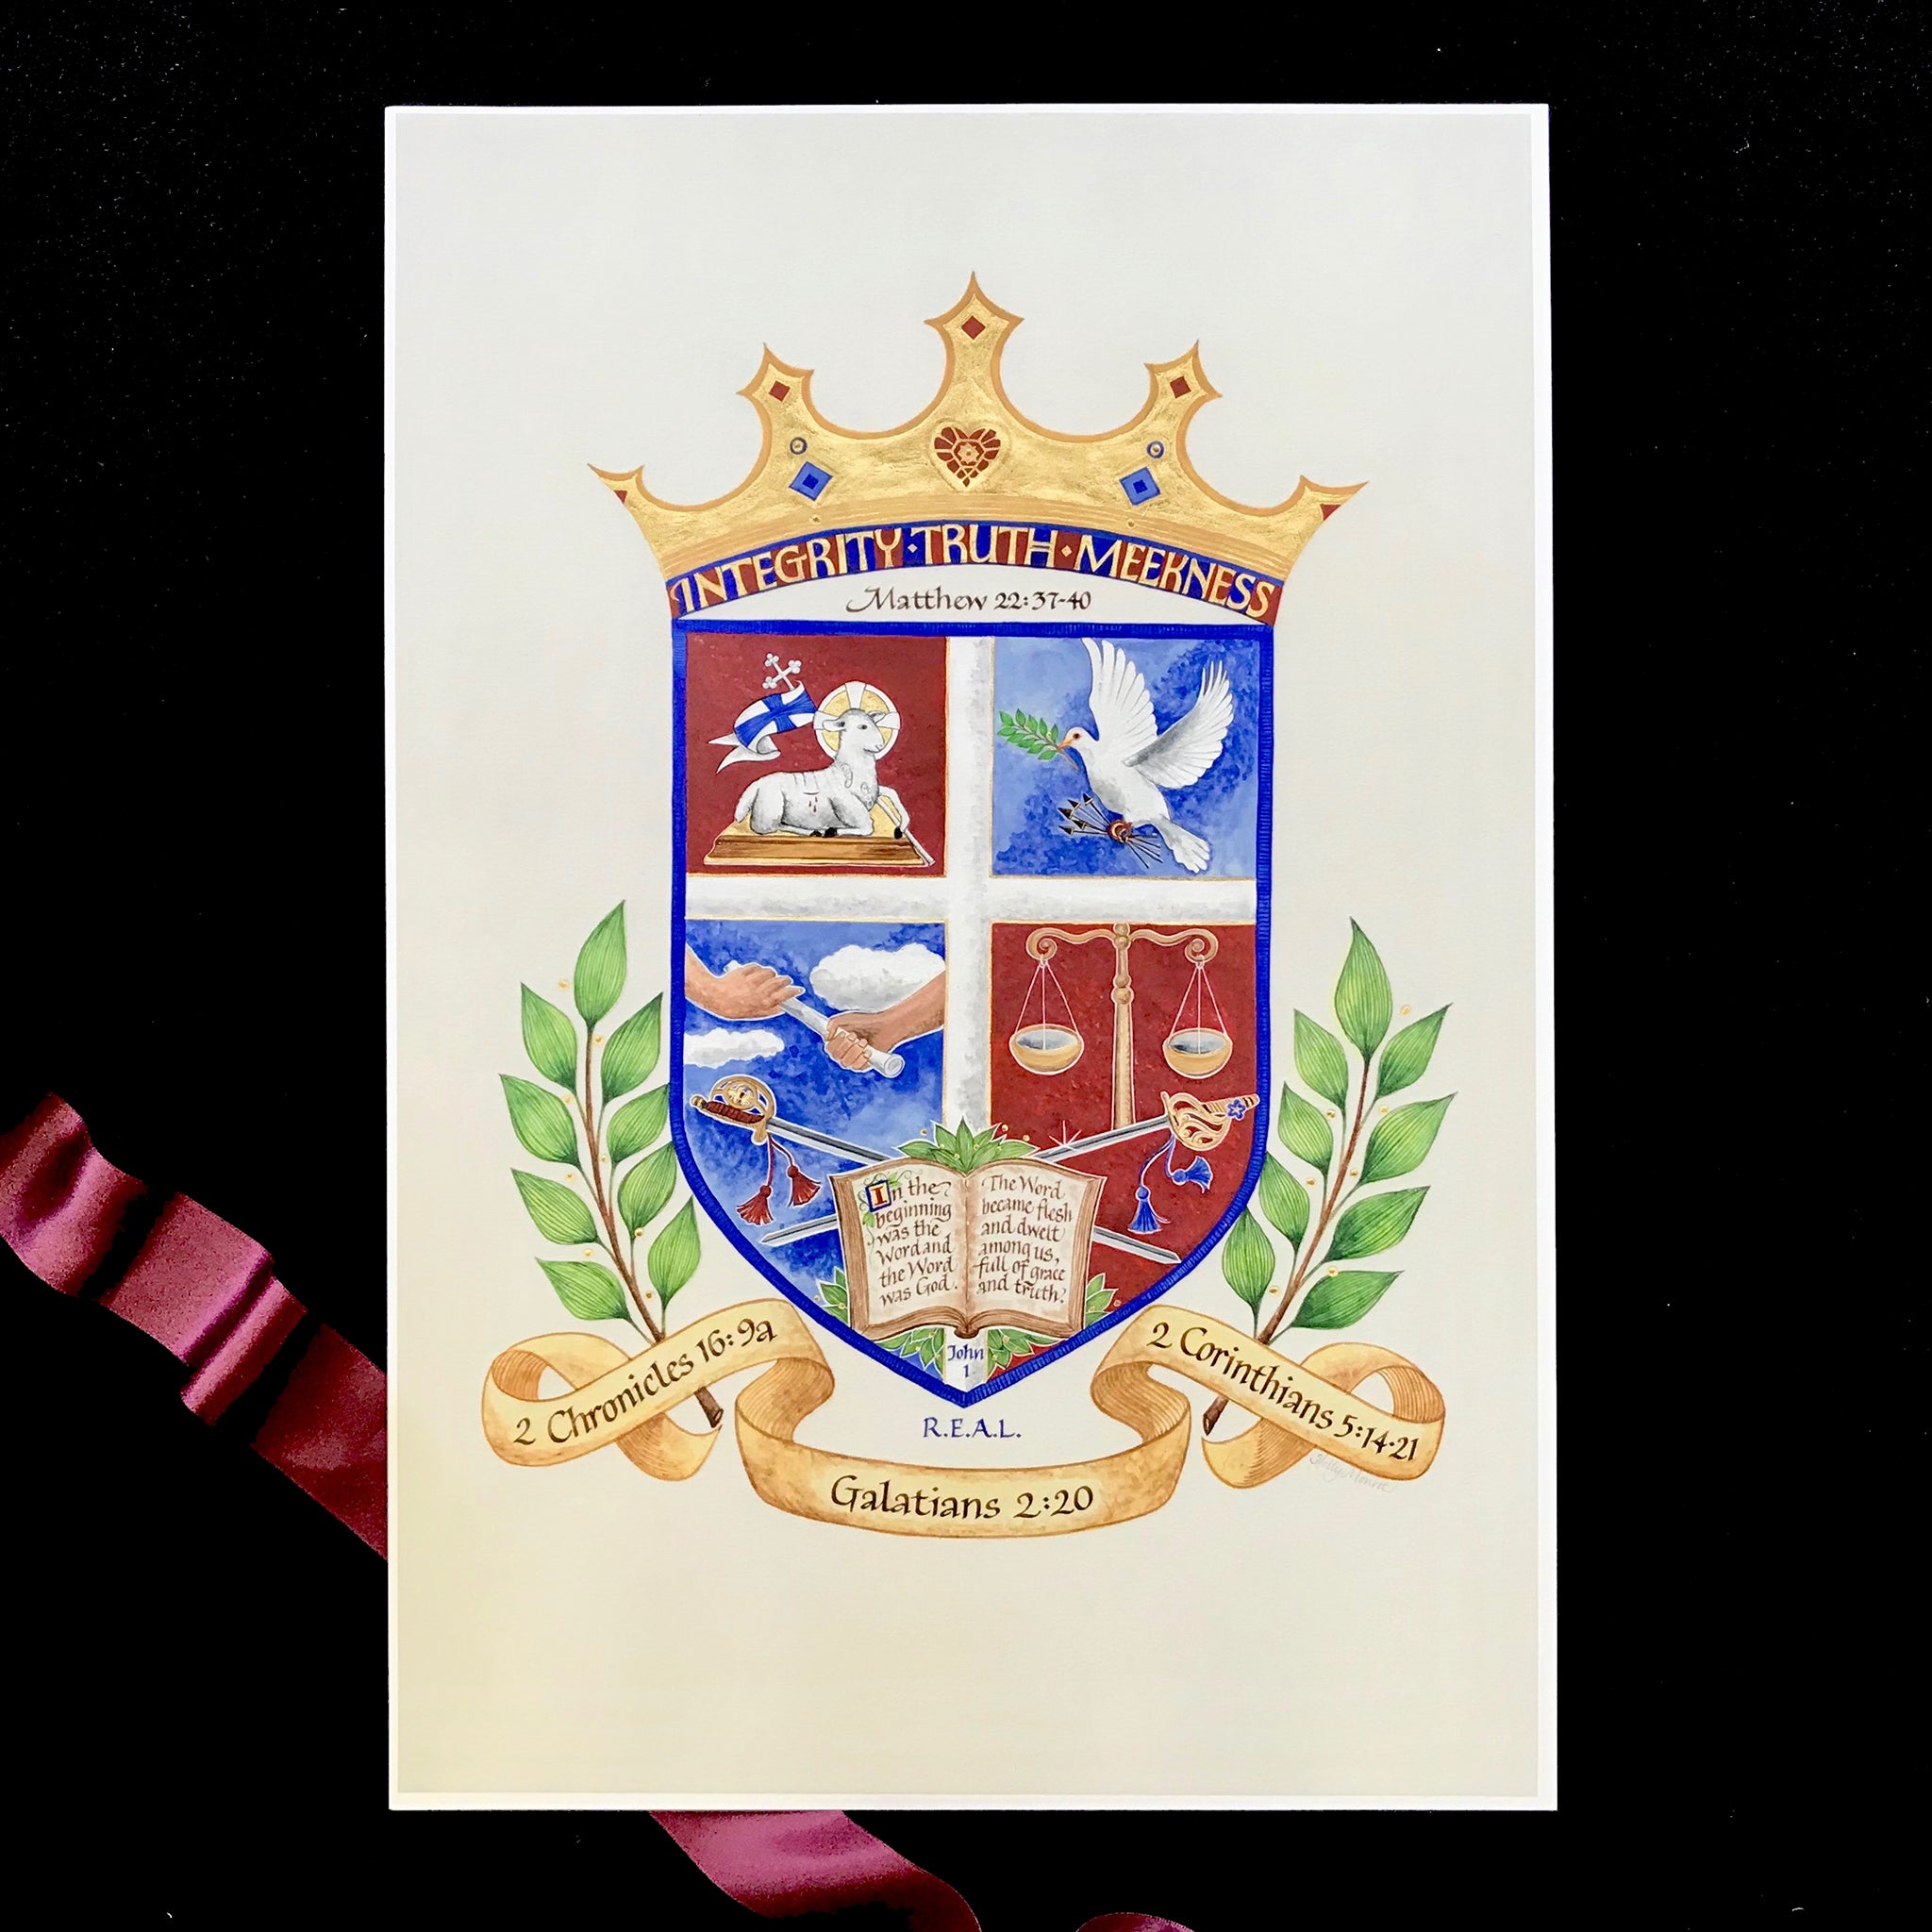 Coat Of Arms, Integrity Truth Meekness